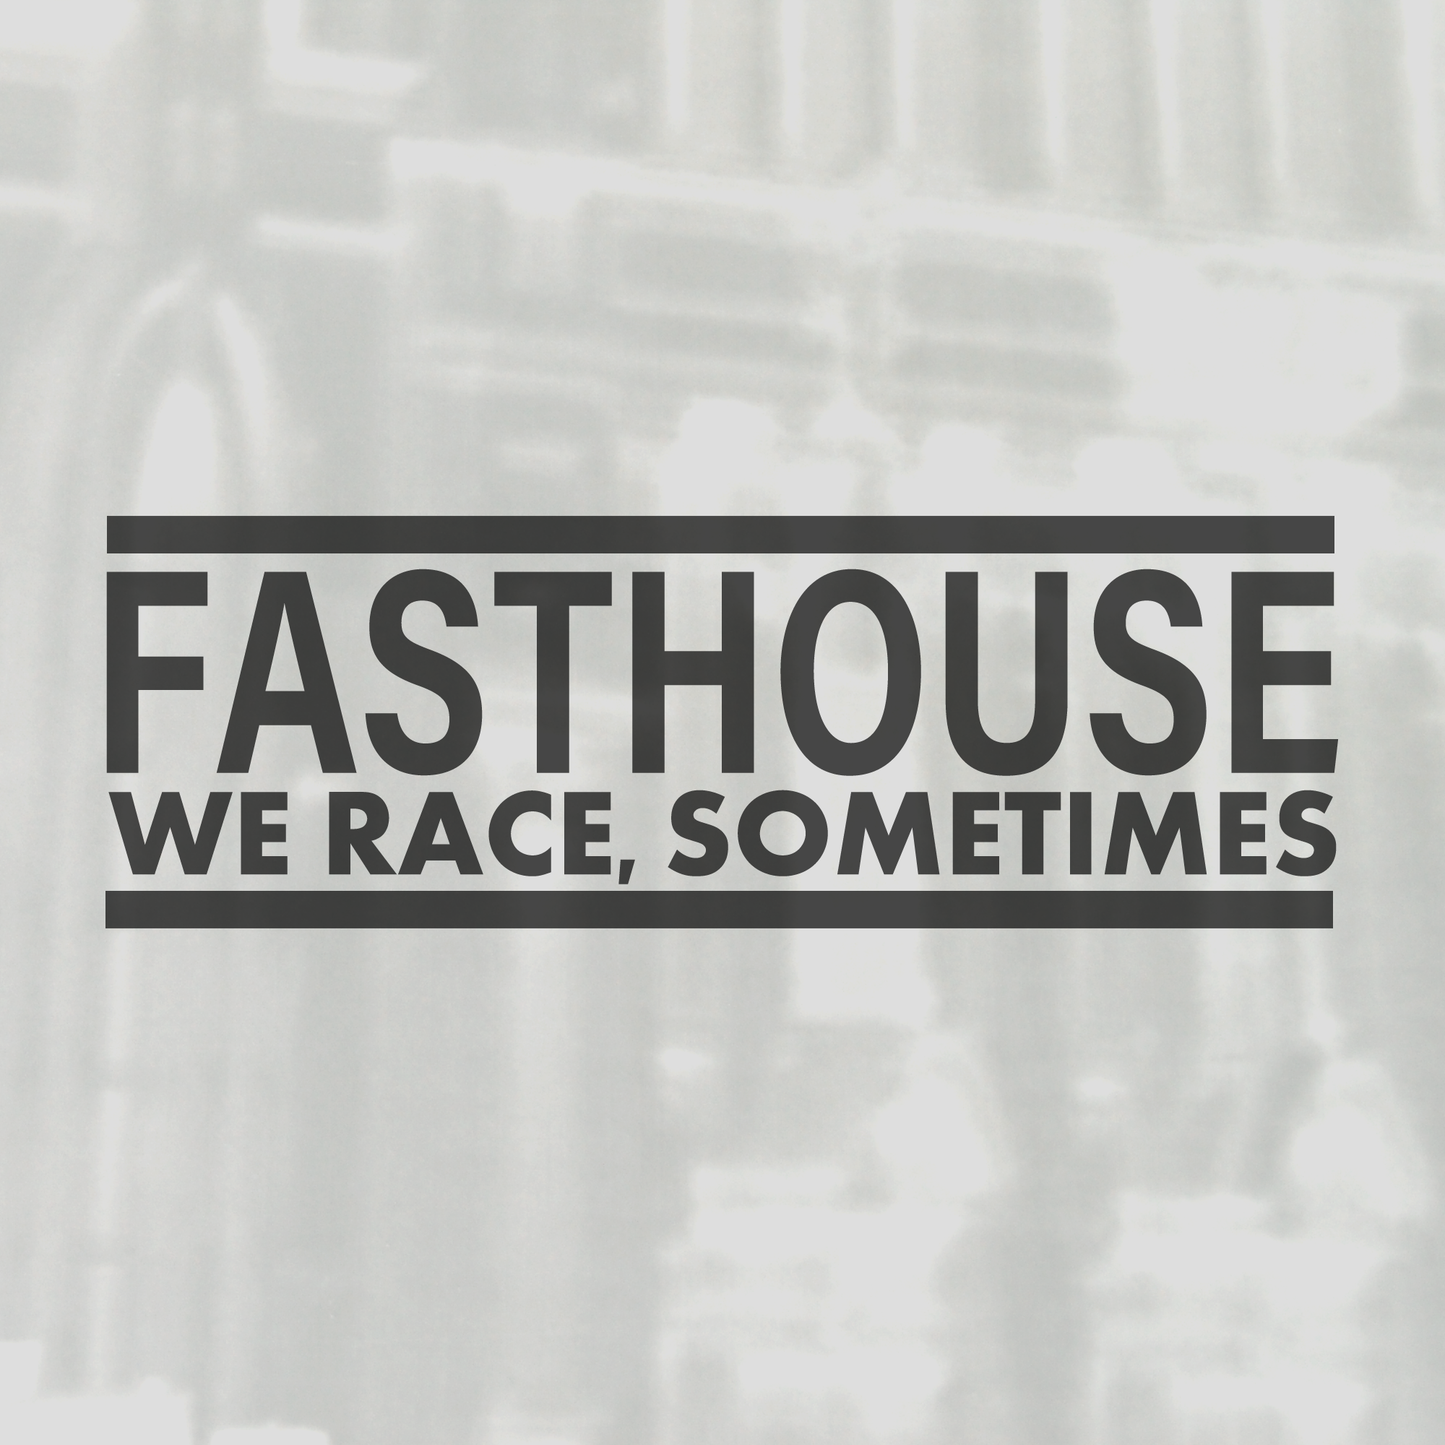 Fasthouse, we race sometimes